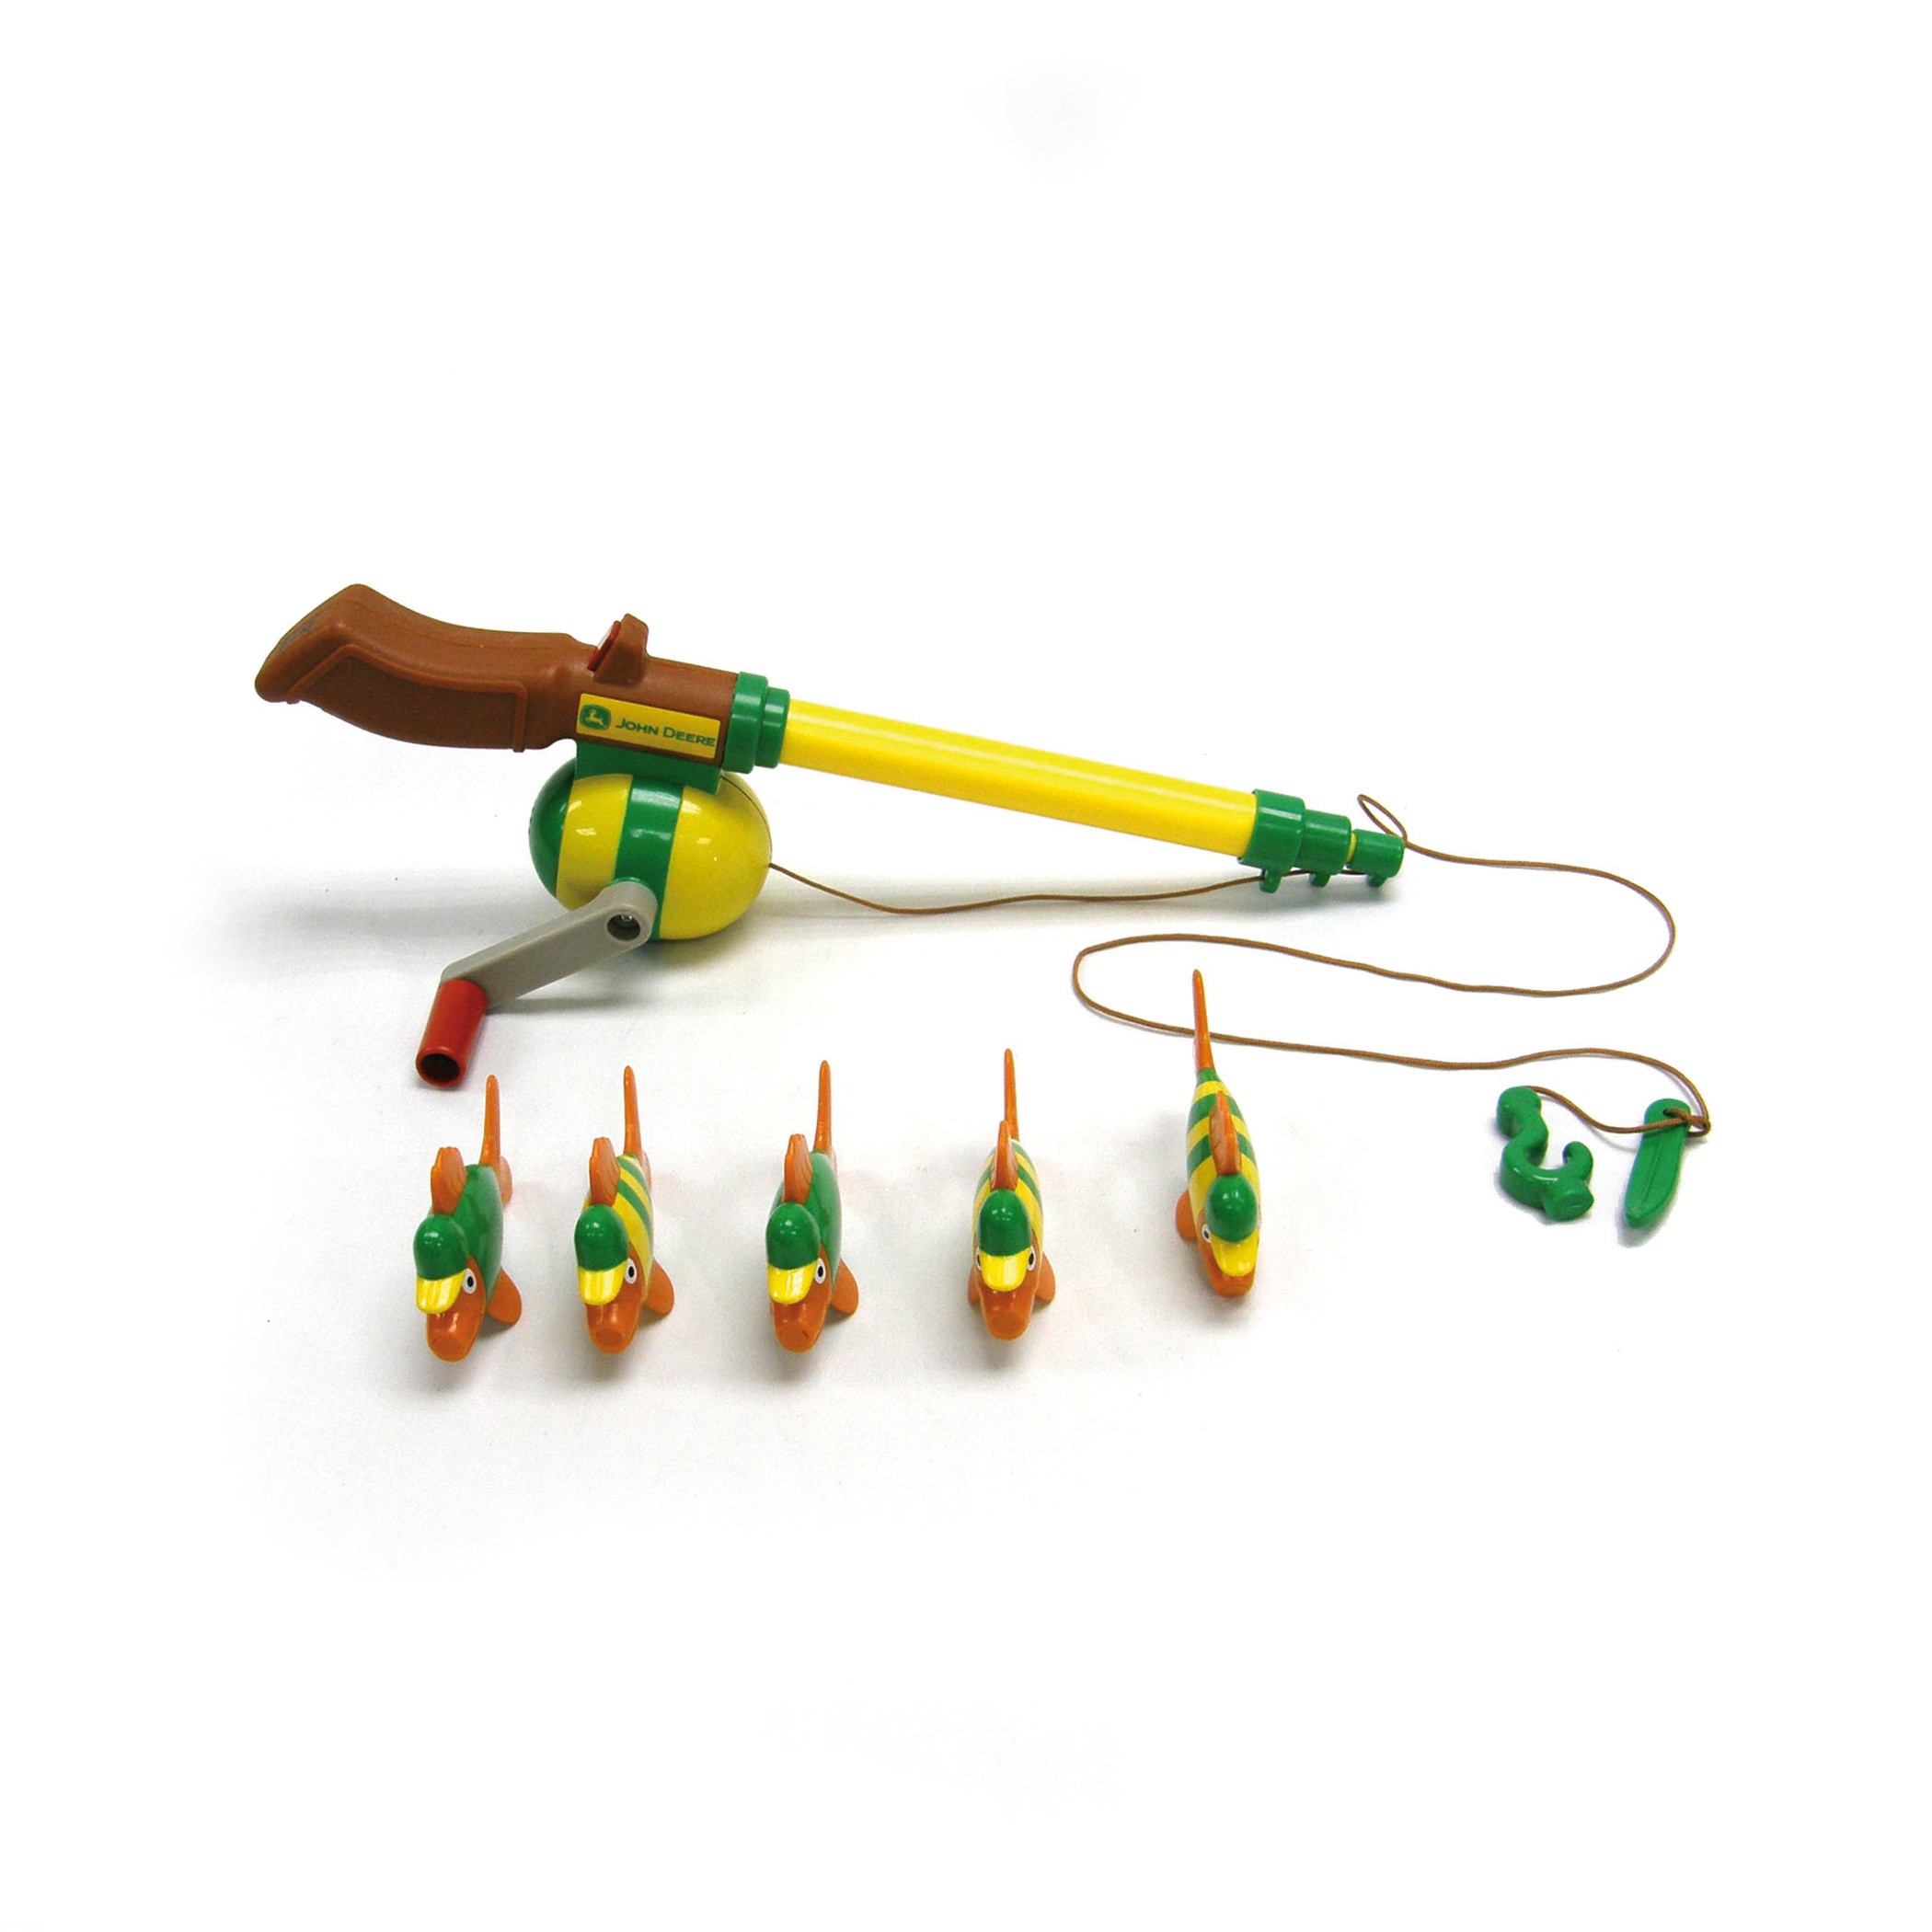 Pole by John Deere will give your child hours of fun. The fishing pole ...